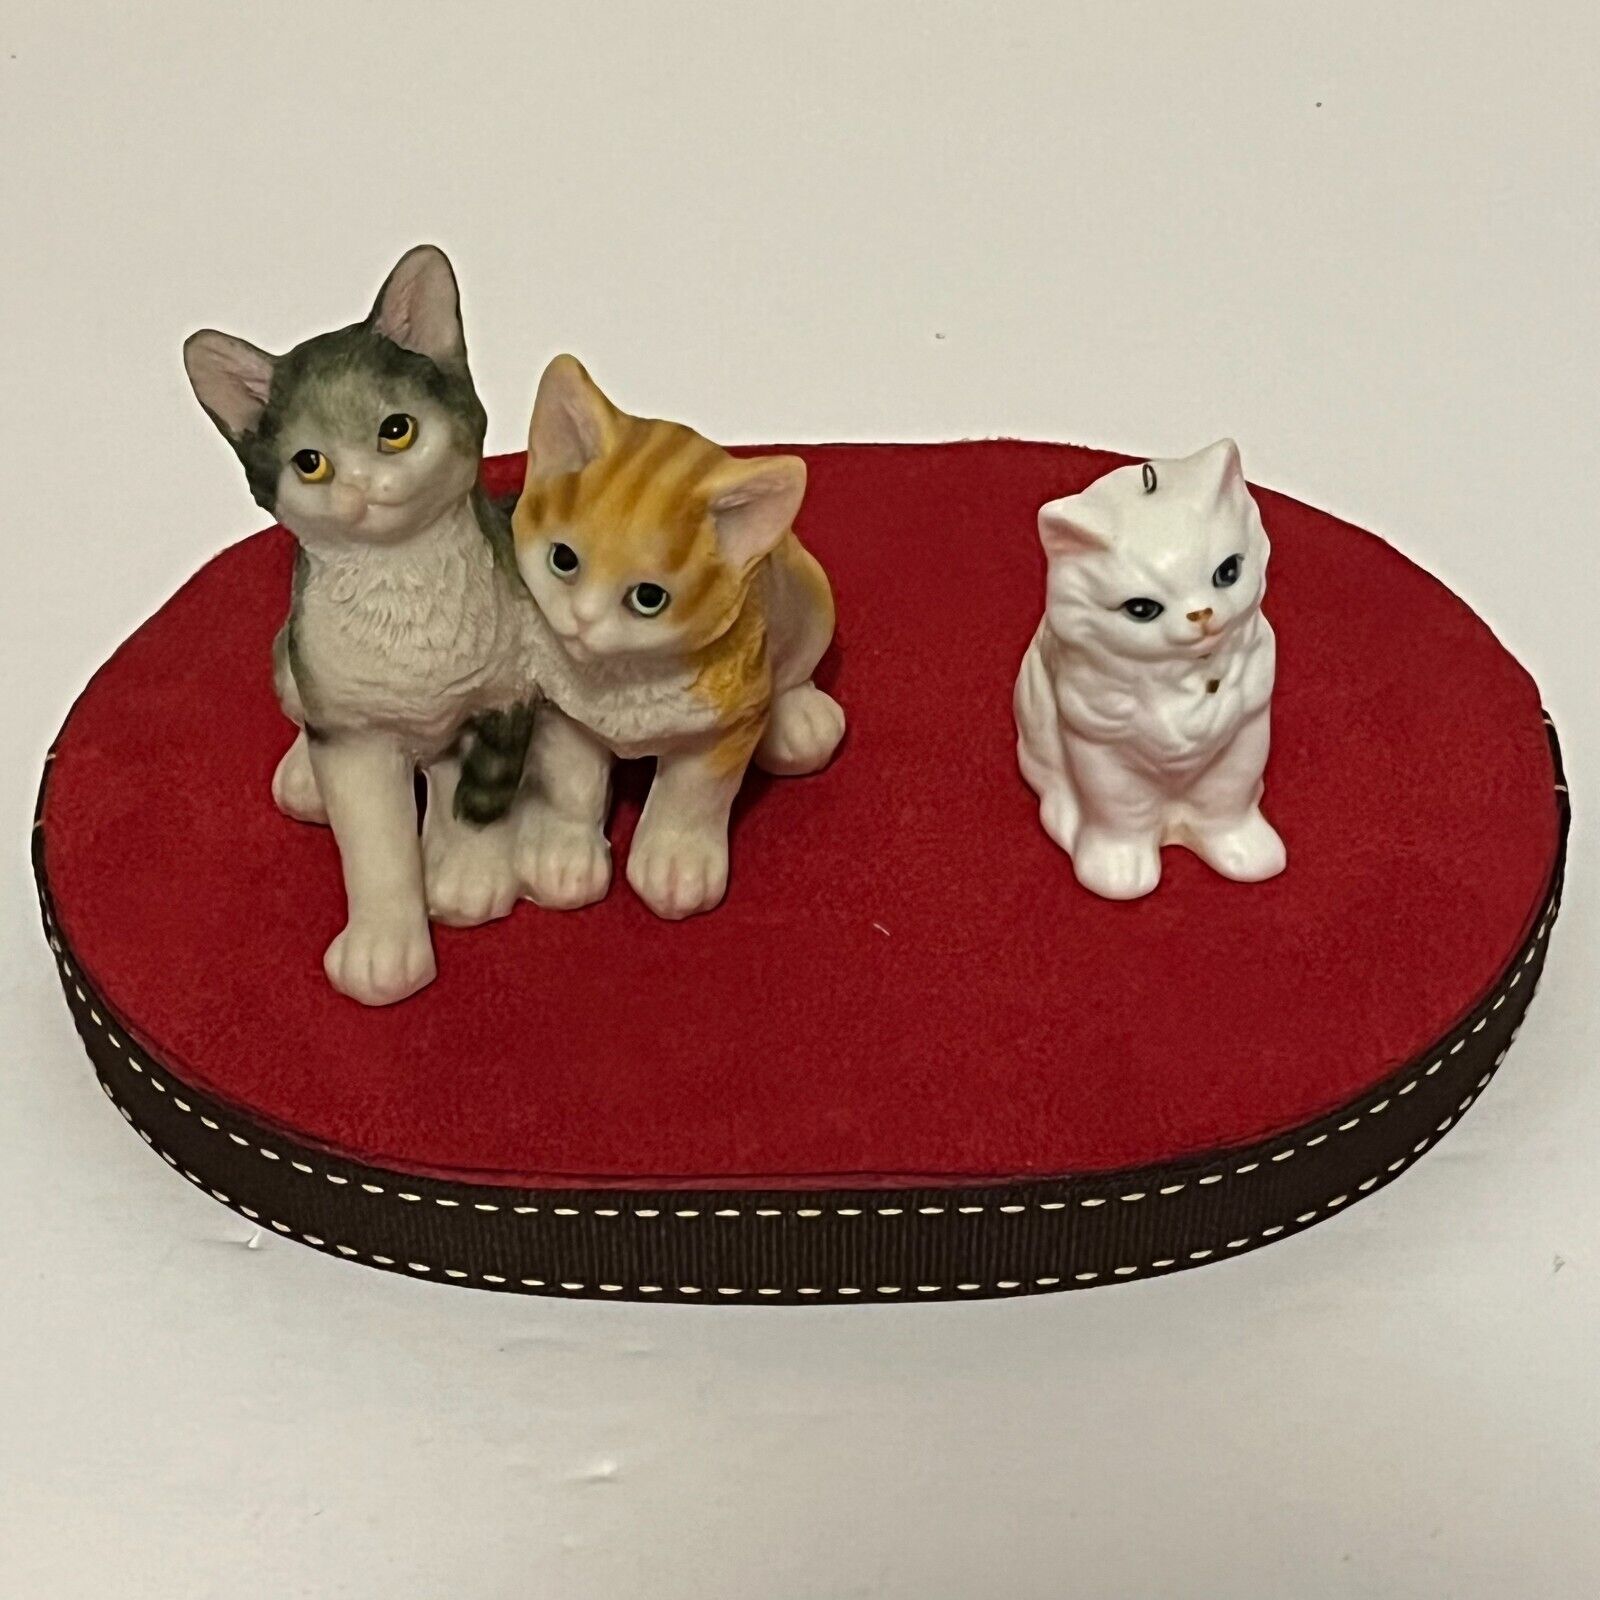 LOT OF 2 COLLECTIBLE PORCELAIN KITTY FIGURINES (1 Single & 1 twins) Pre-owned